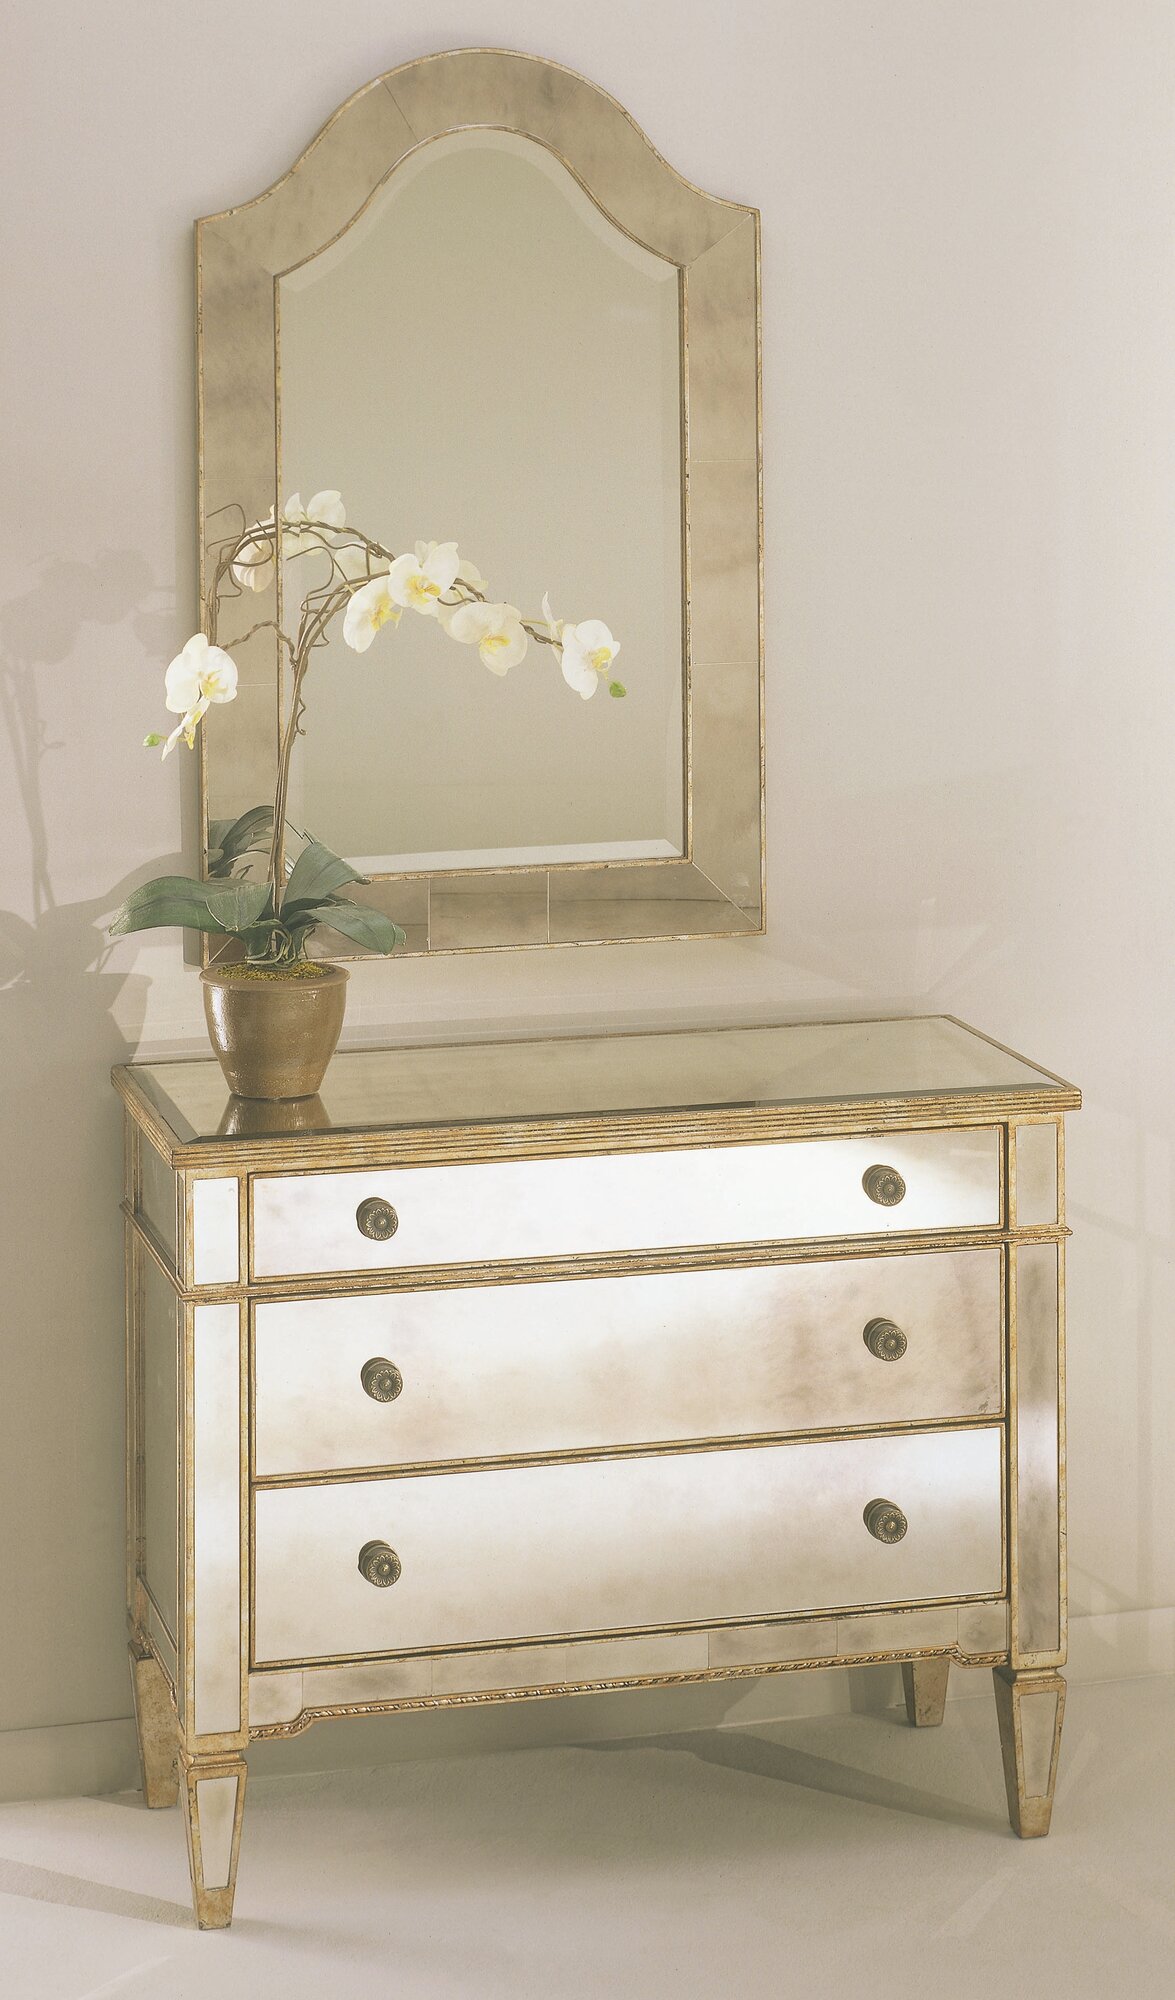 Bassett Borghese Mirrored 3 Drawer Hall, Borghese Mirrored Hall Chest